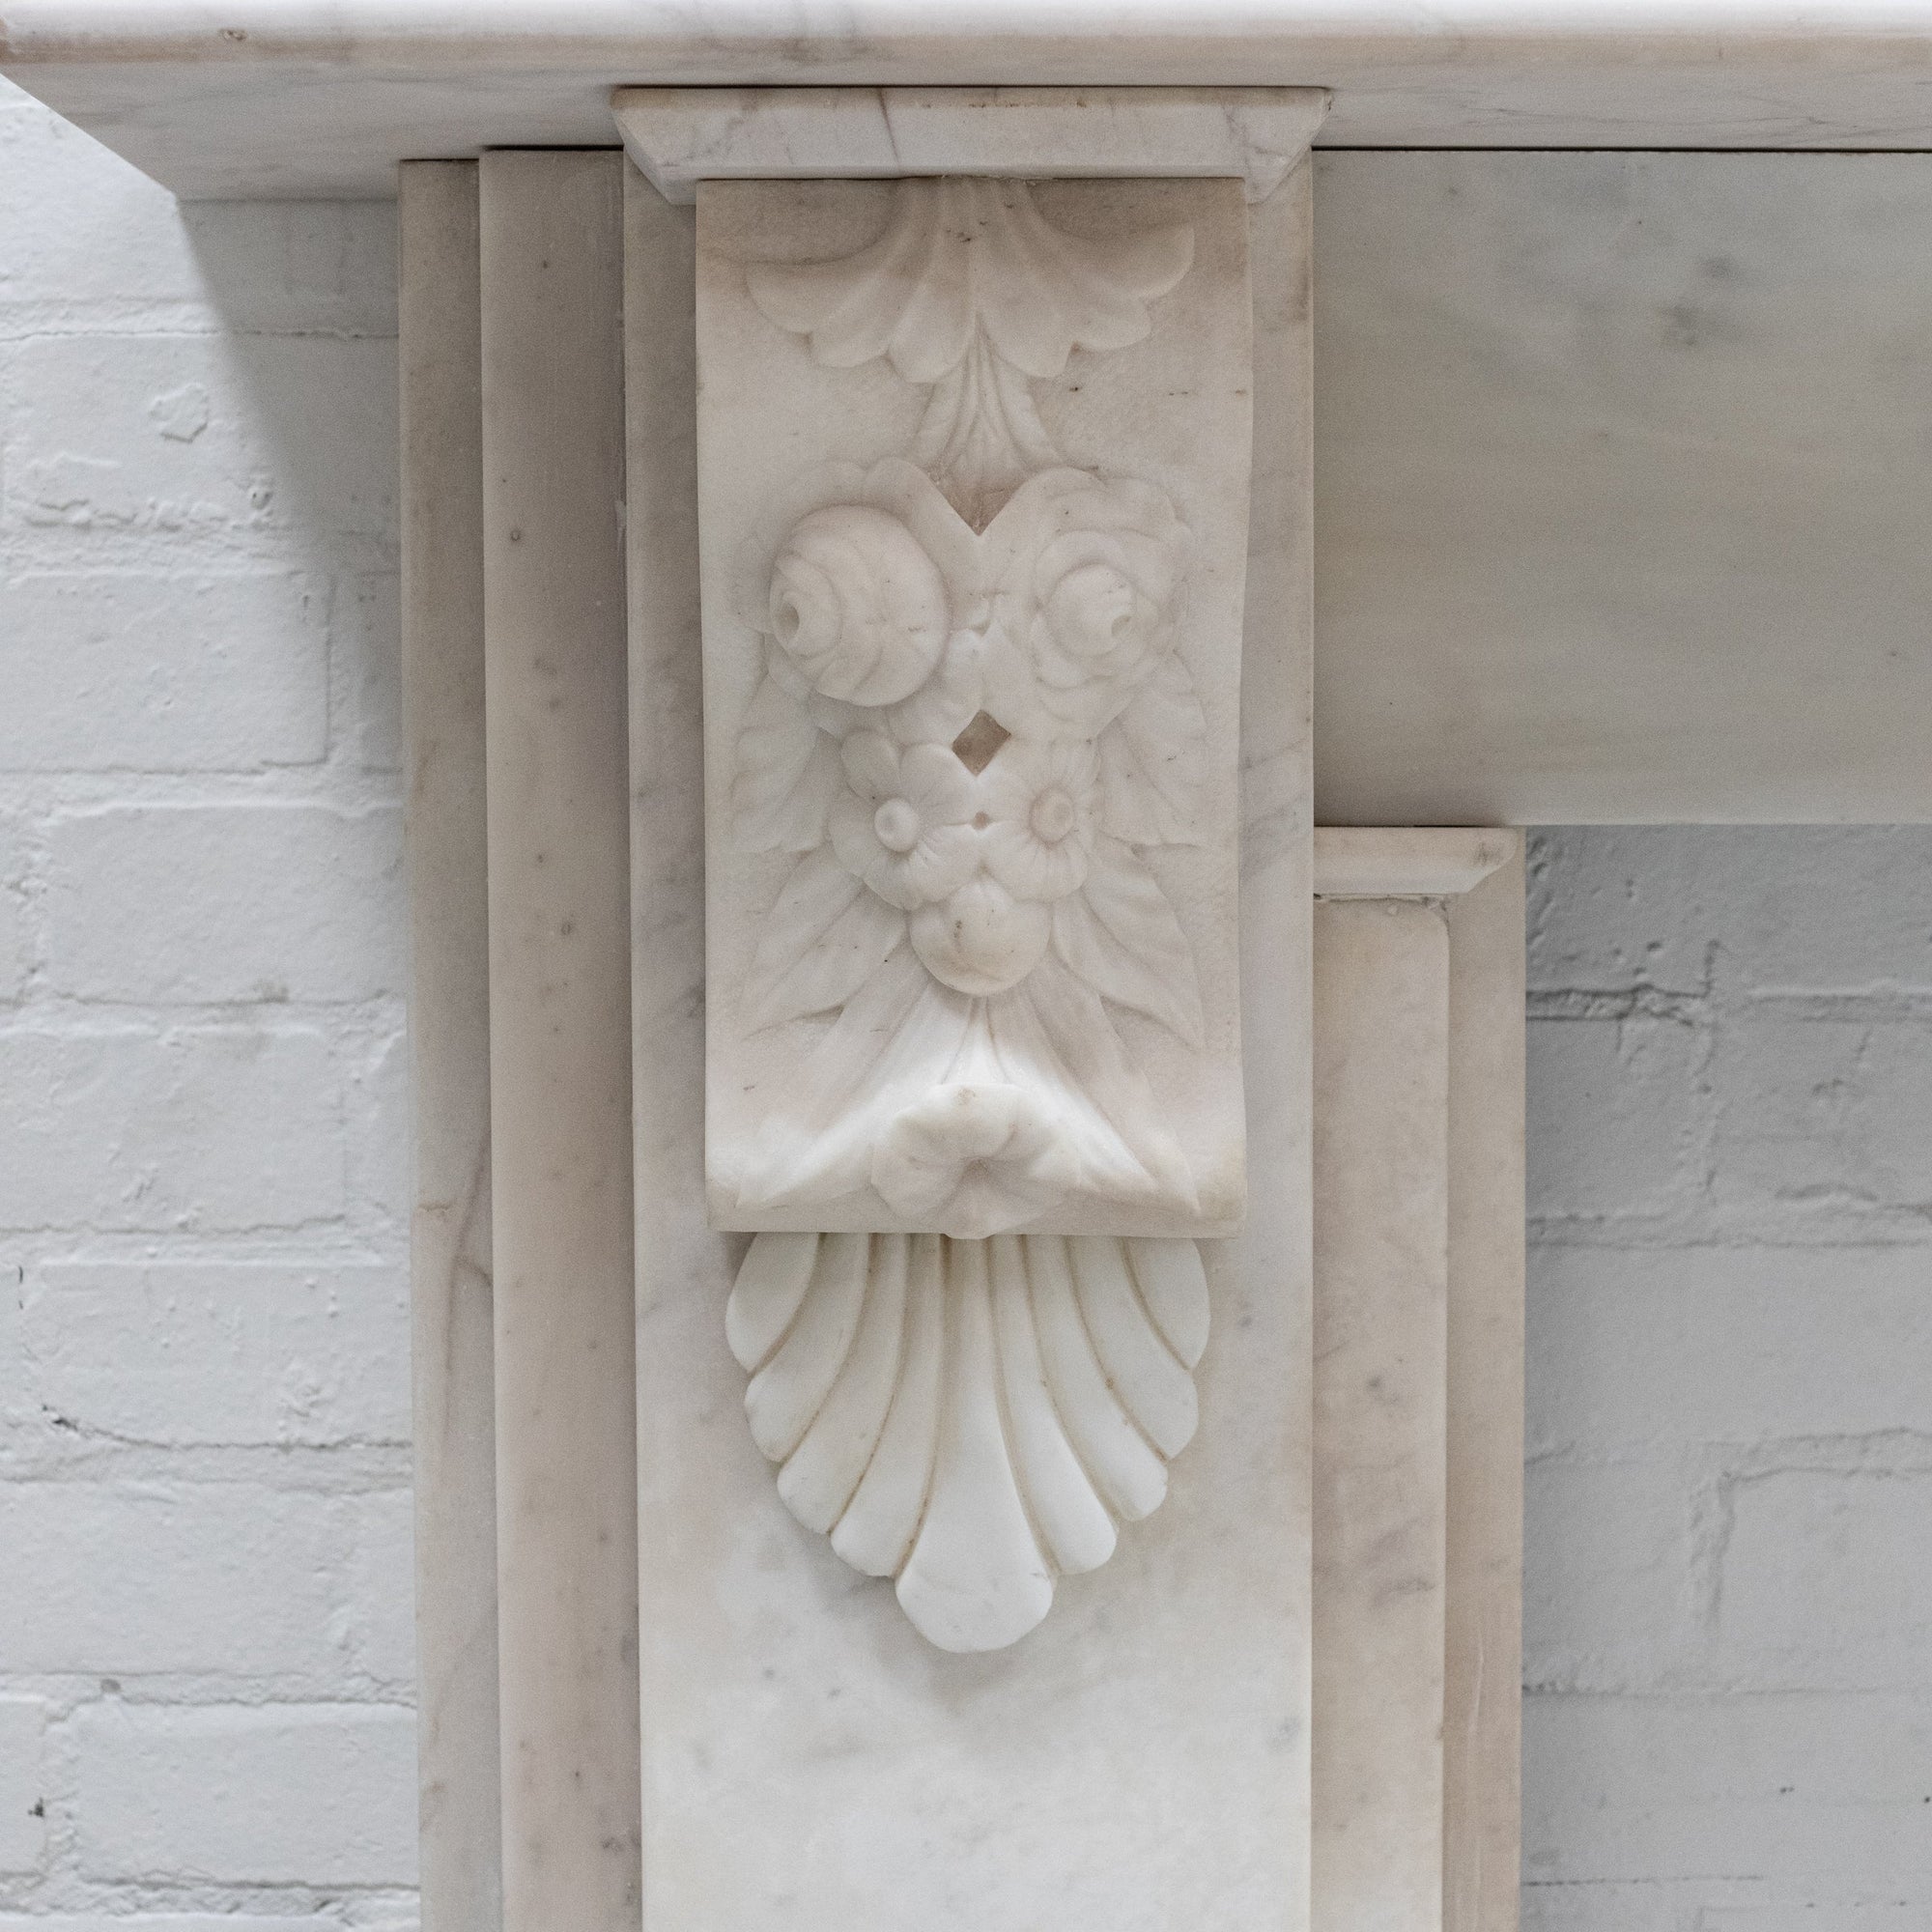 Antique Victorian Statuary Marble Chimneypiece with Carved Corbels | The Architectural Forum